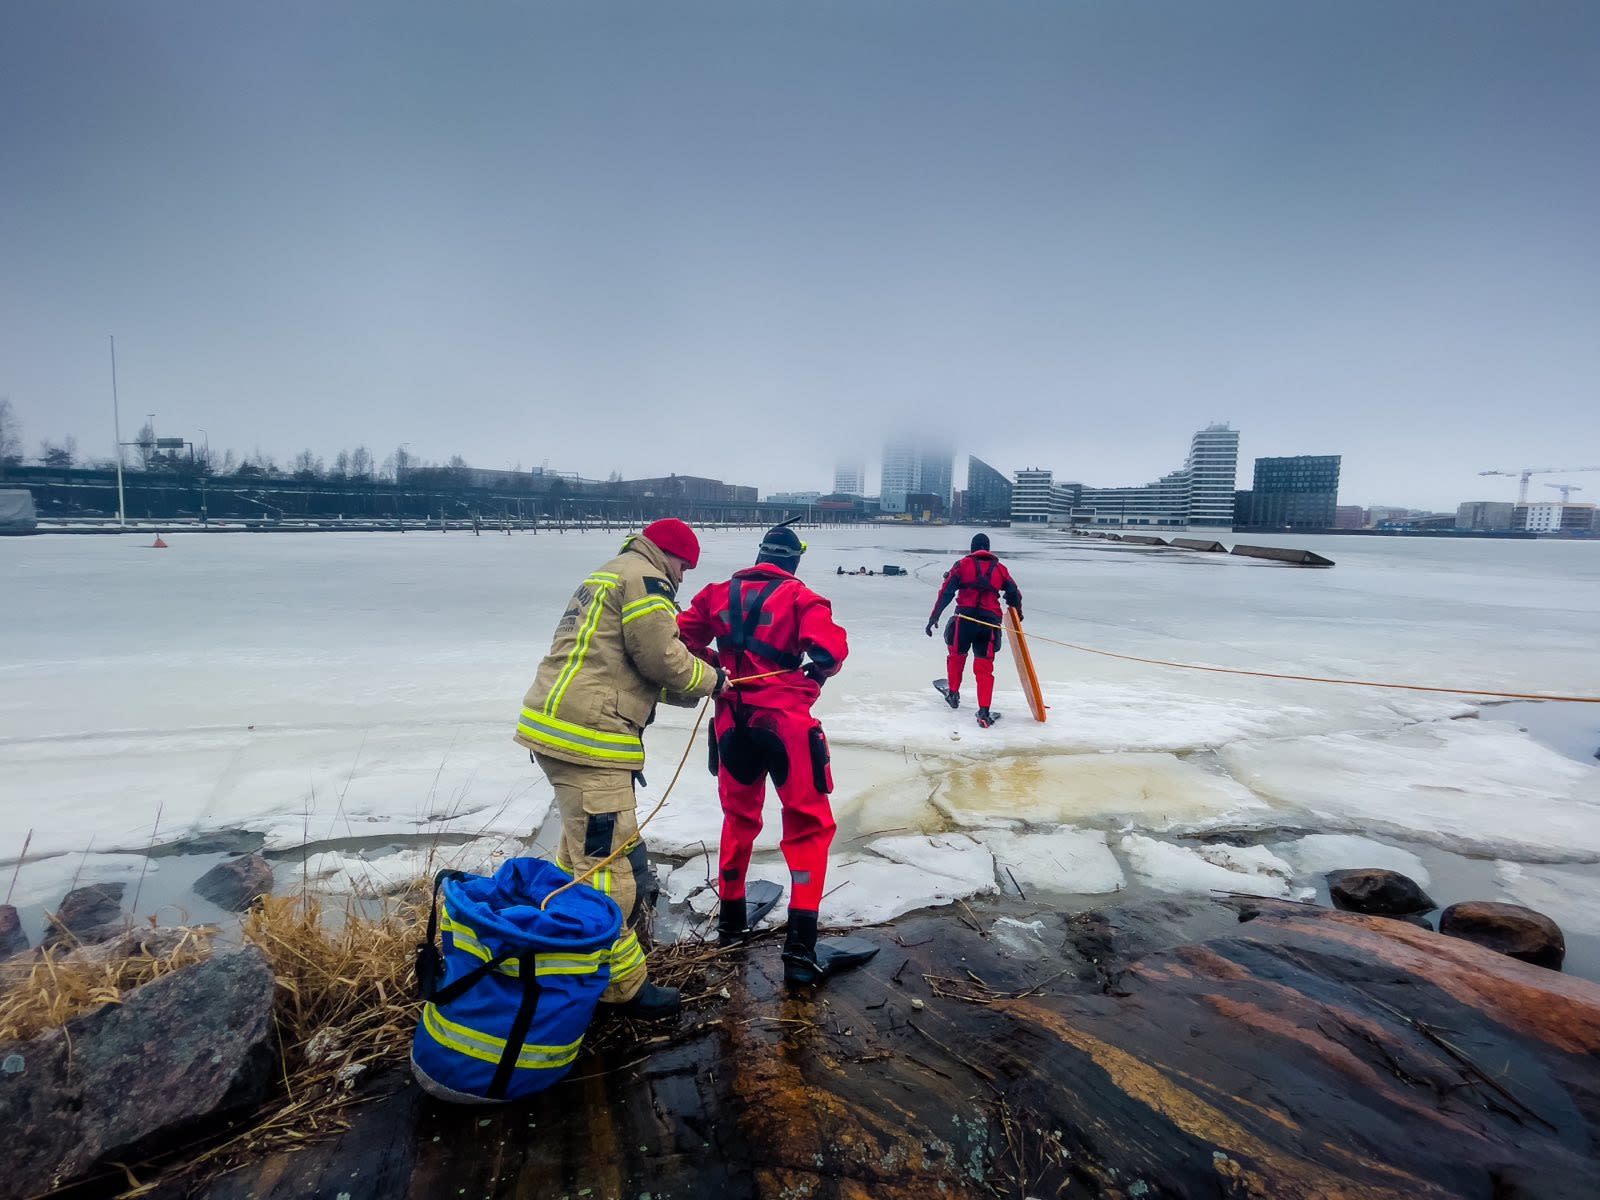 The rescue service warns of worsening ice conditions